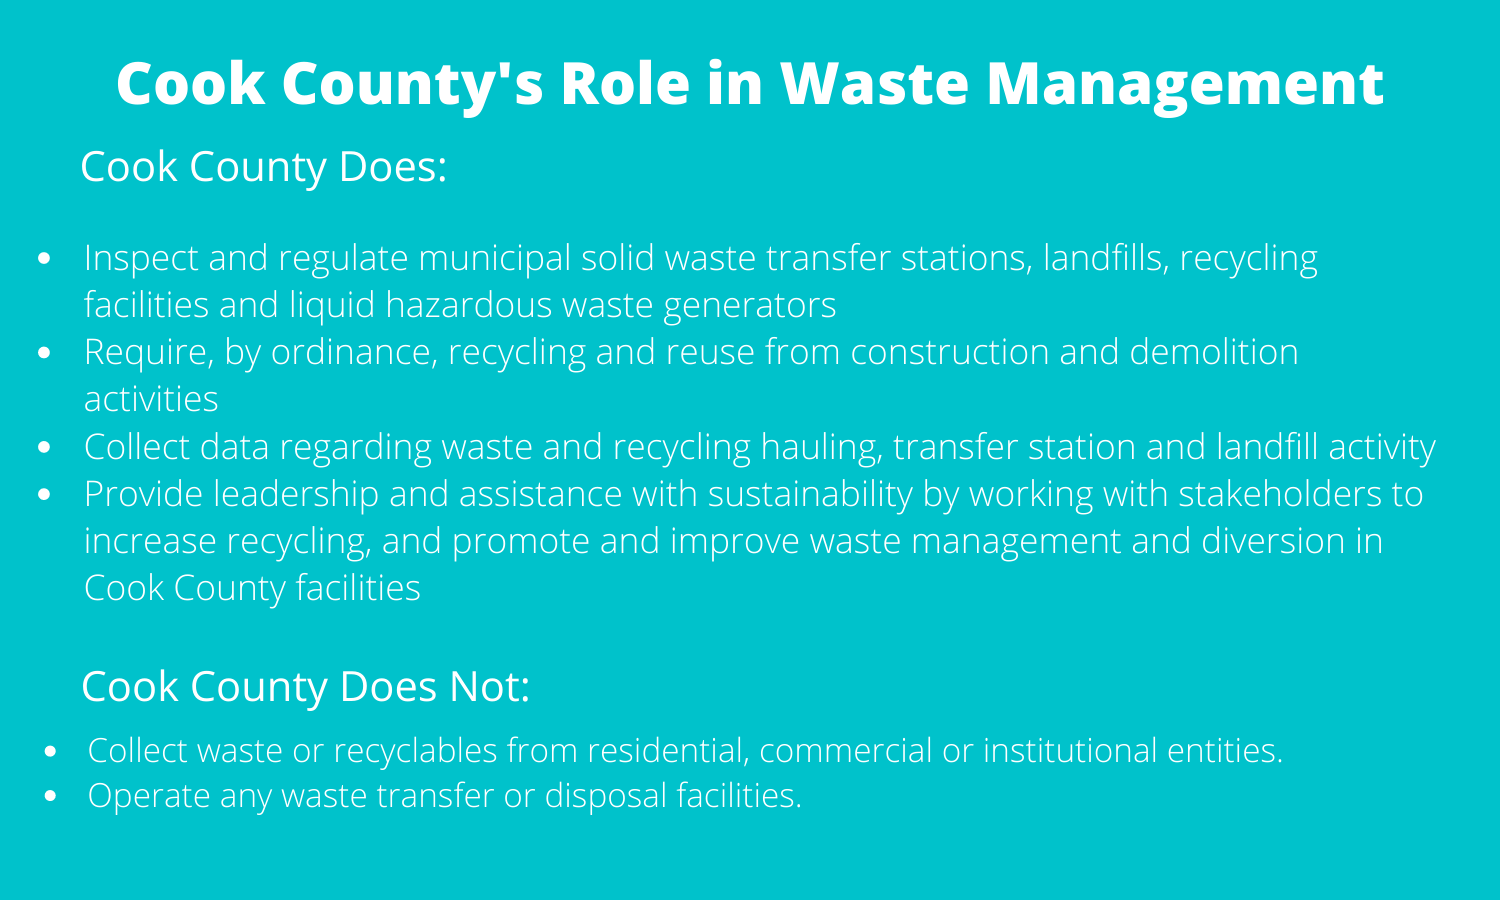 https://www.cookcountyil.gov/sites/g/files/ywwepo161/files/images/2021-09-30/updated_cook_countys_role_in_waste_management.png